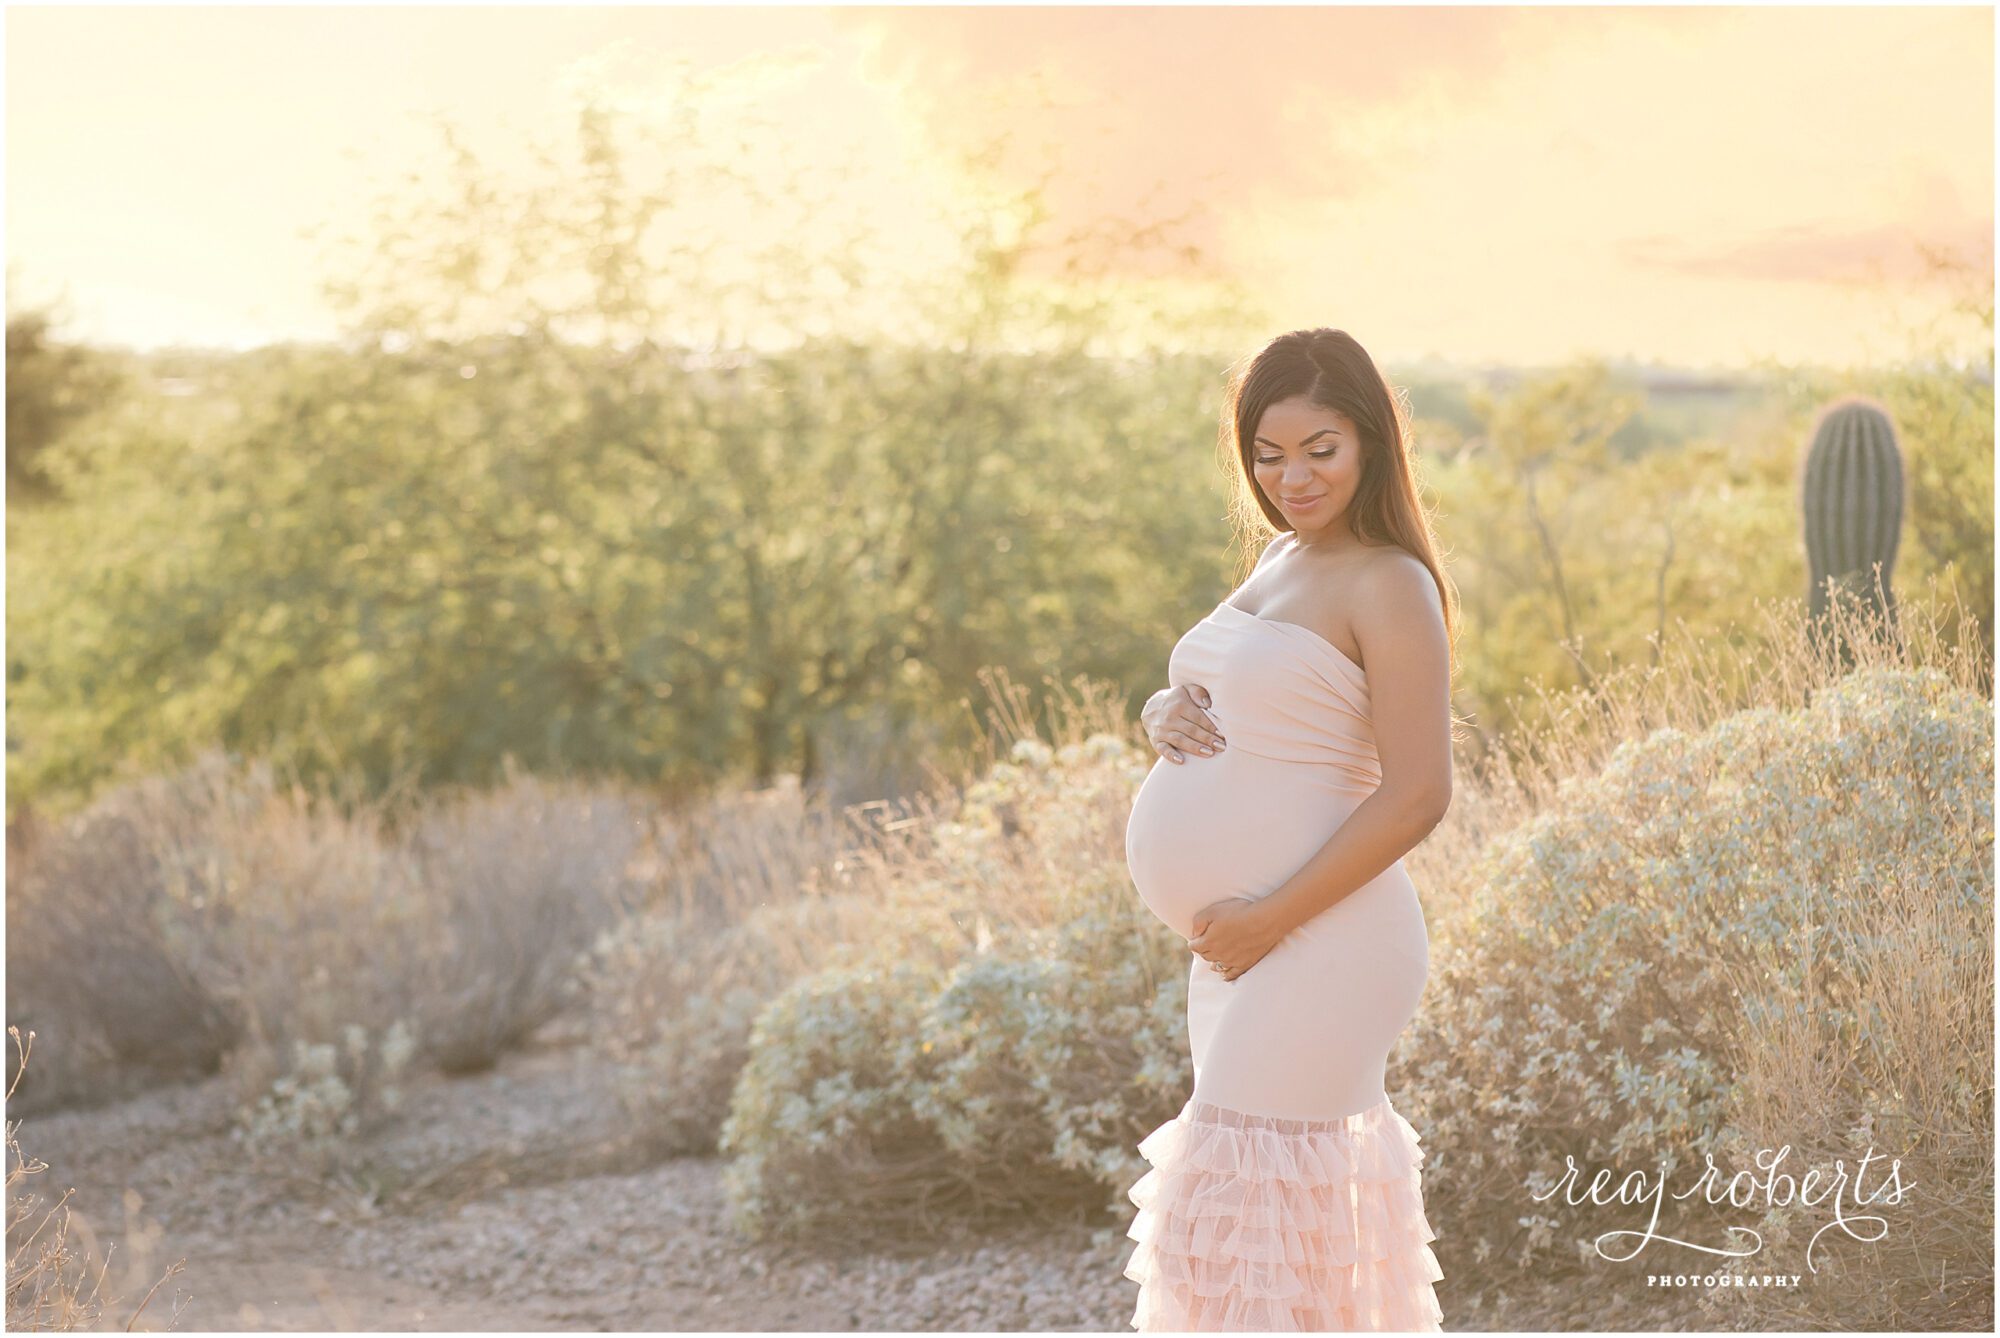 TAOPAN maternity gown, sunset maternity session | Reaj Roberts Photography